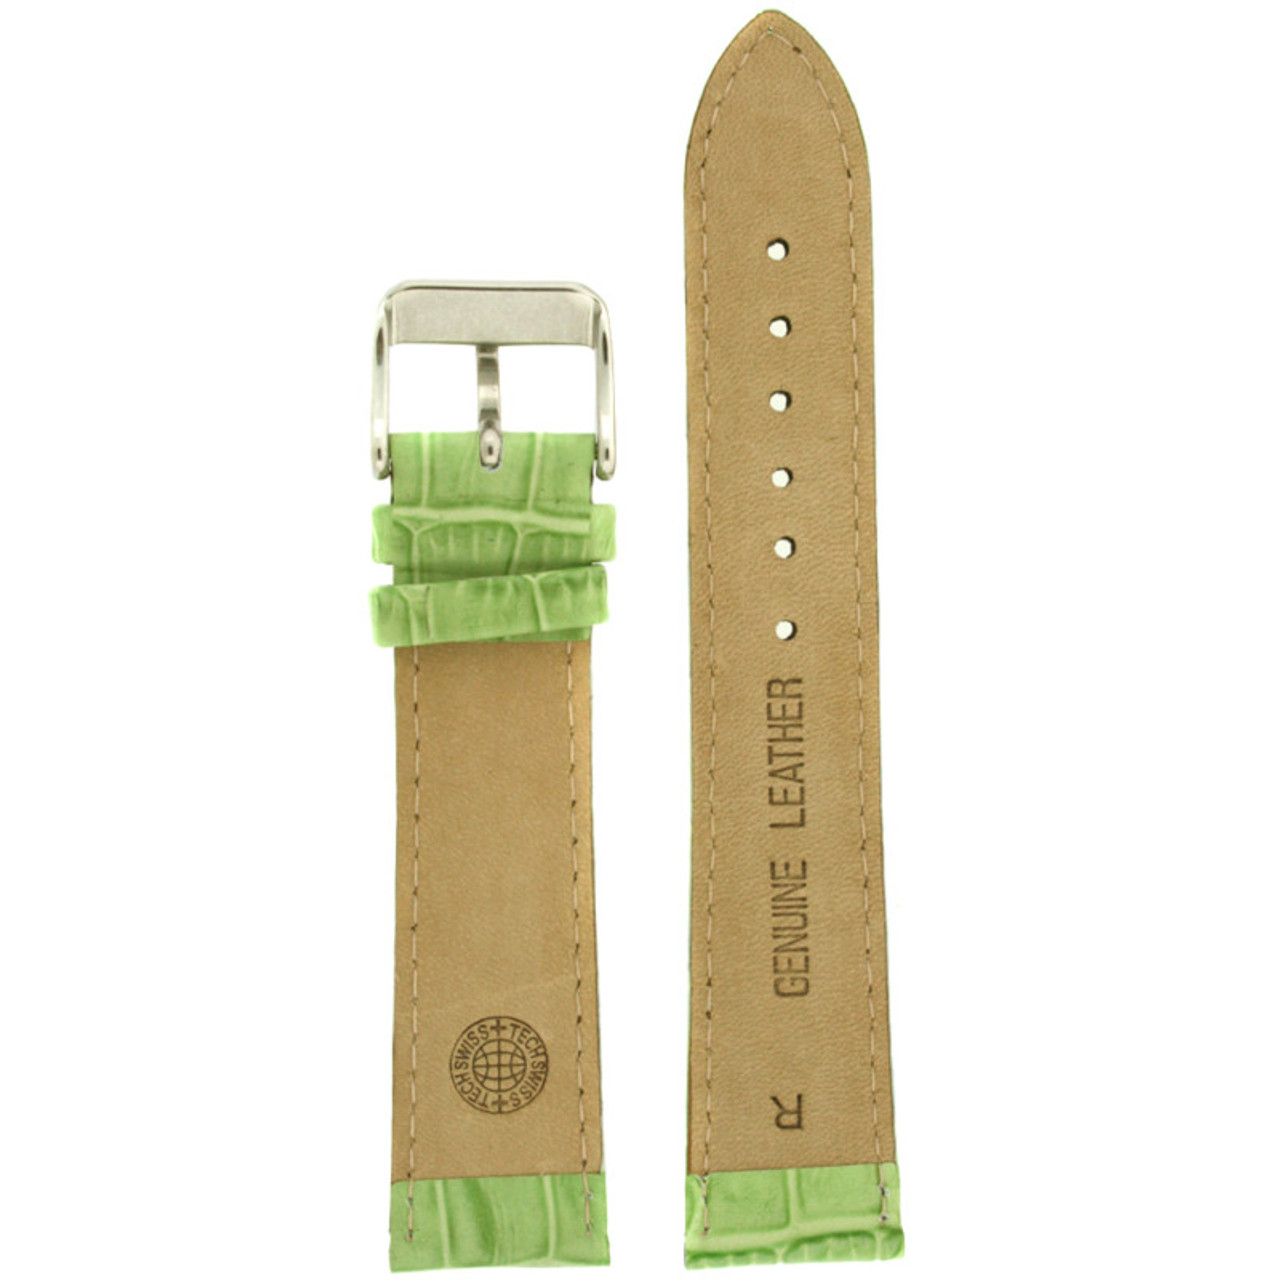 Leather Watch Band with Alligator Grain Print in Lime Green by Tech Swiss - Interior View - Main